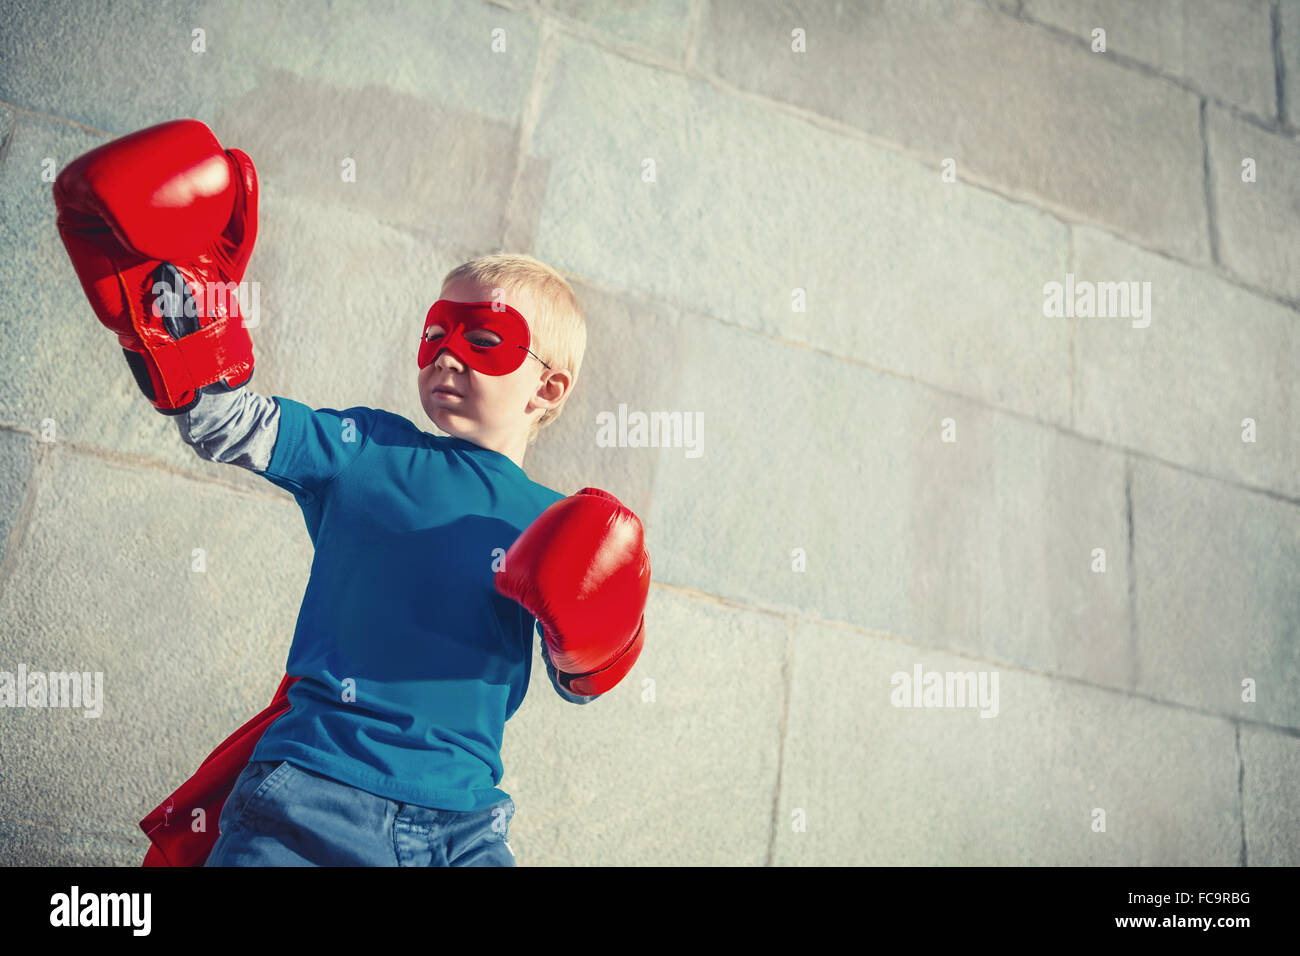 Boy with boxing gloves Stock Photo